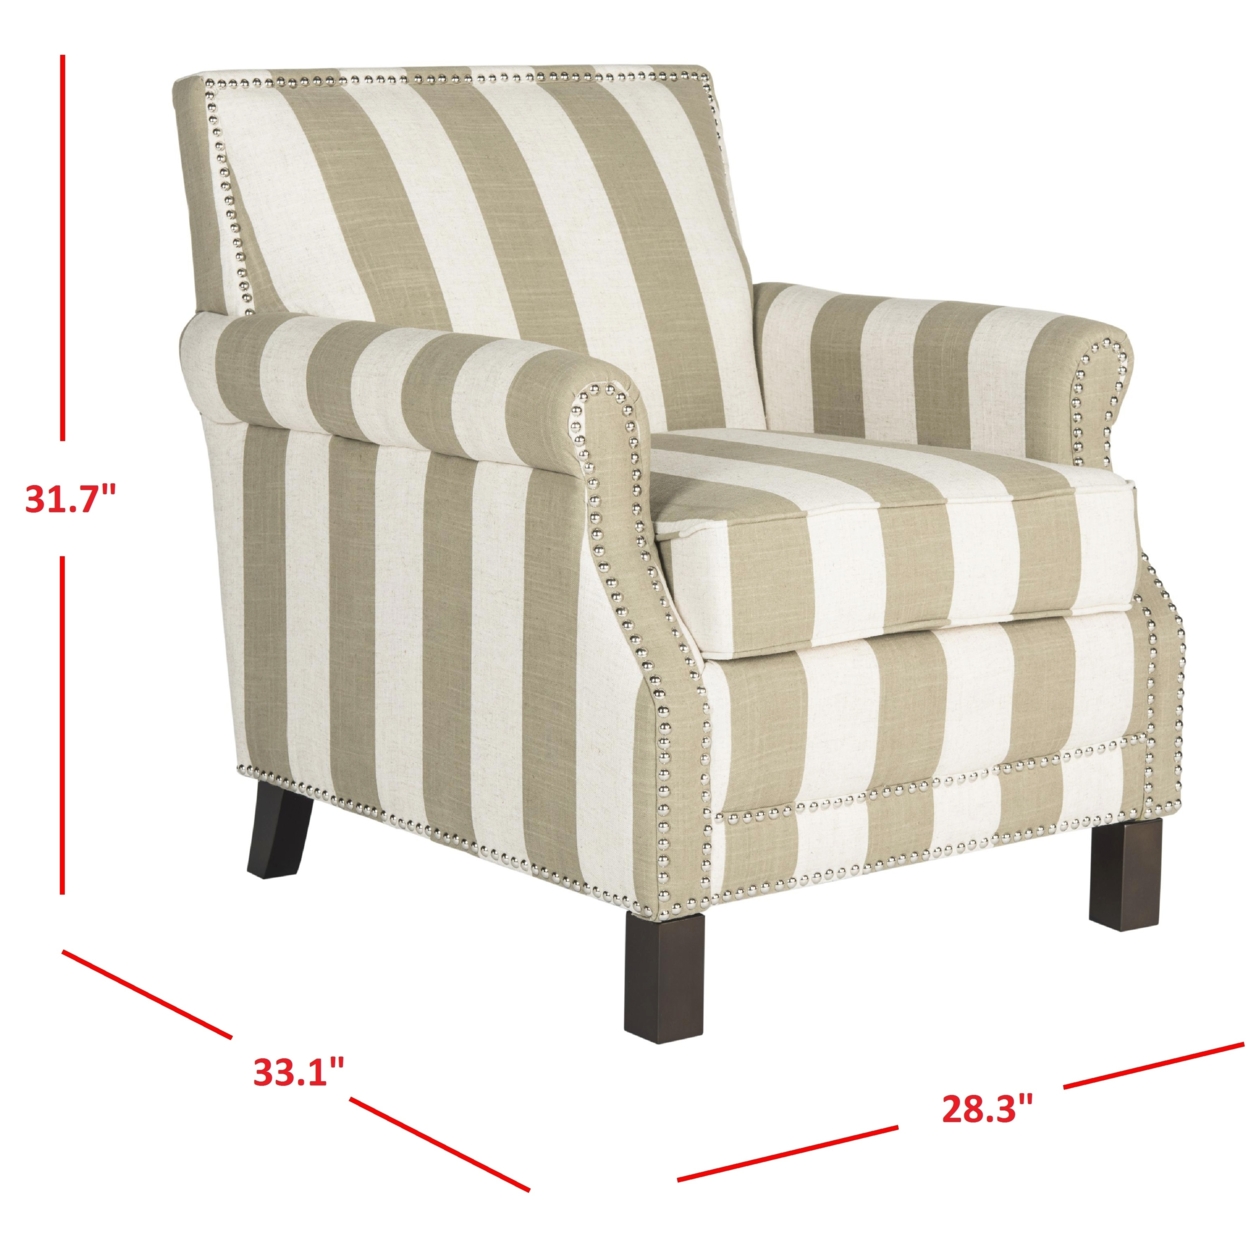 SAFAVIEH Easton Rustic Glam Upholstered Club Chair w/ Nailheads, Olive/White - image 4 of 7